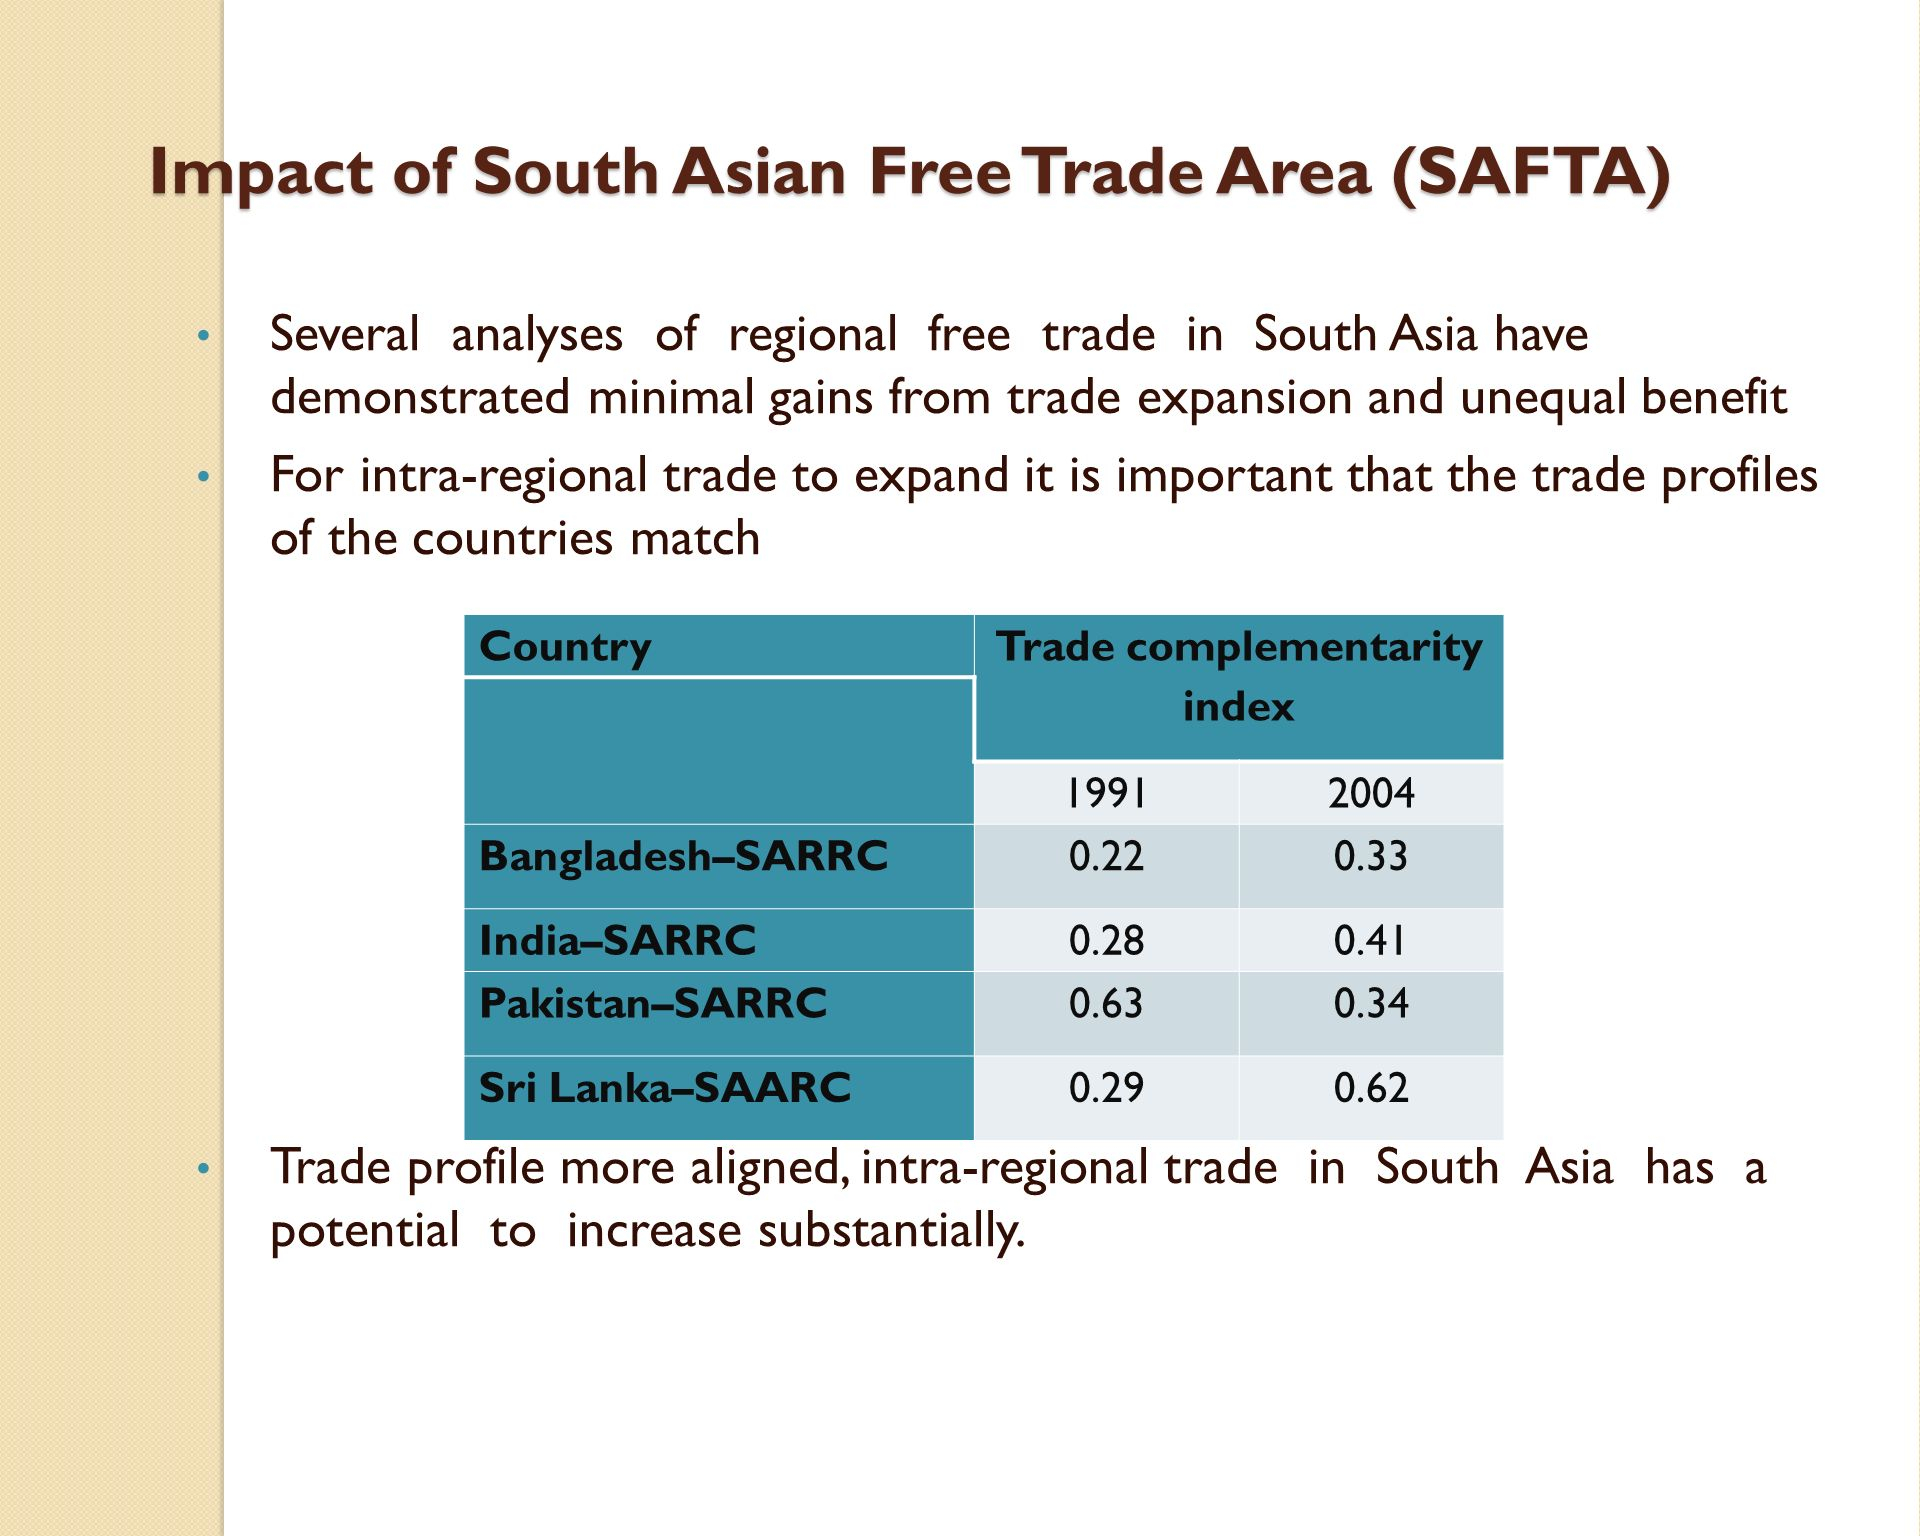 South Asian Preferential Trade Agreement South Asian Free Trade Agreement Safta Issues And Implications